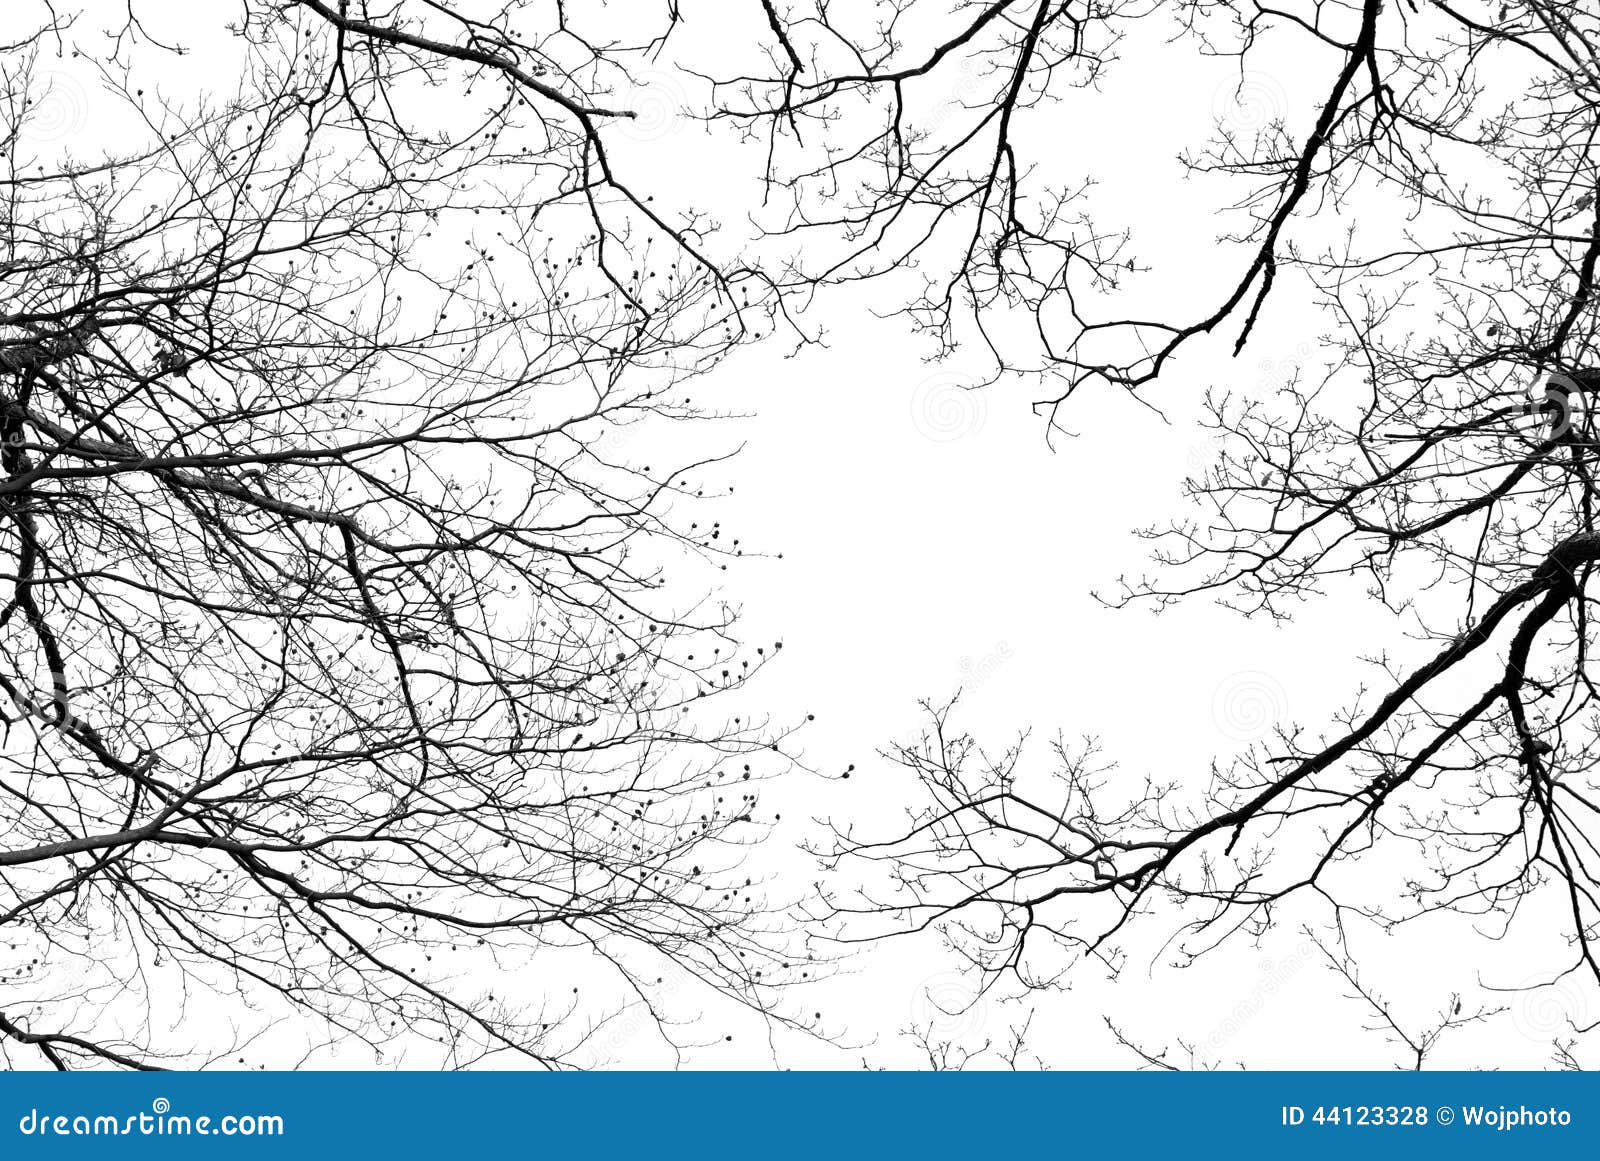 bare tree branches on a white background